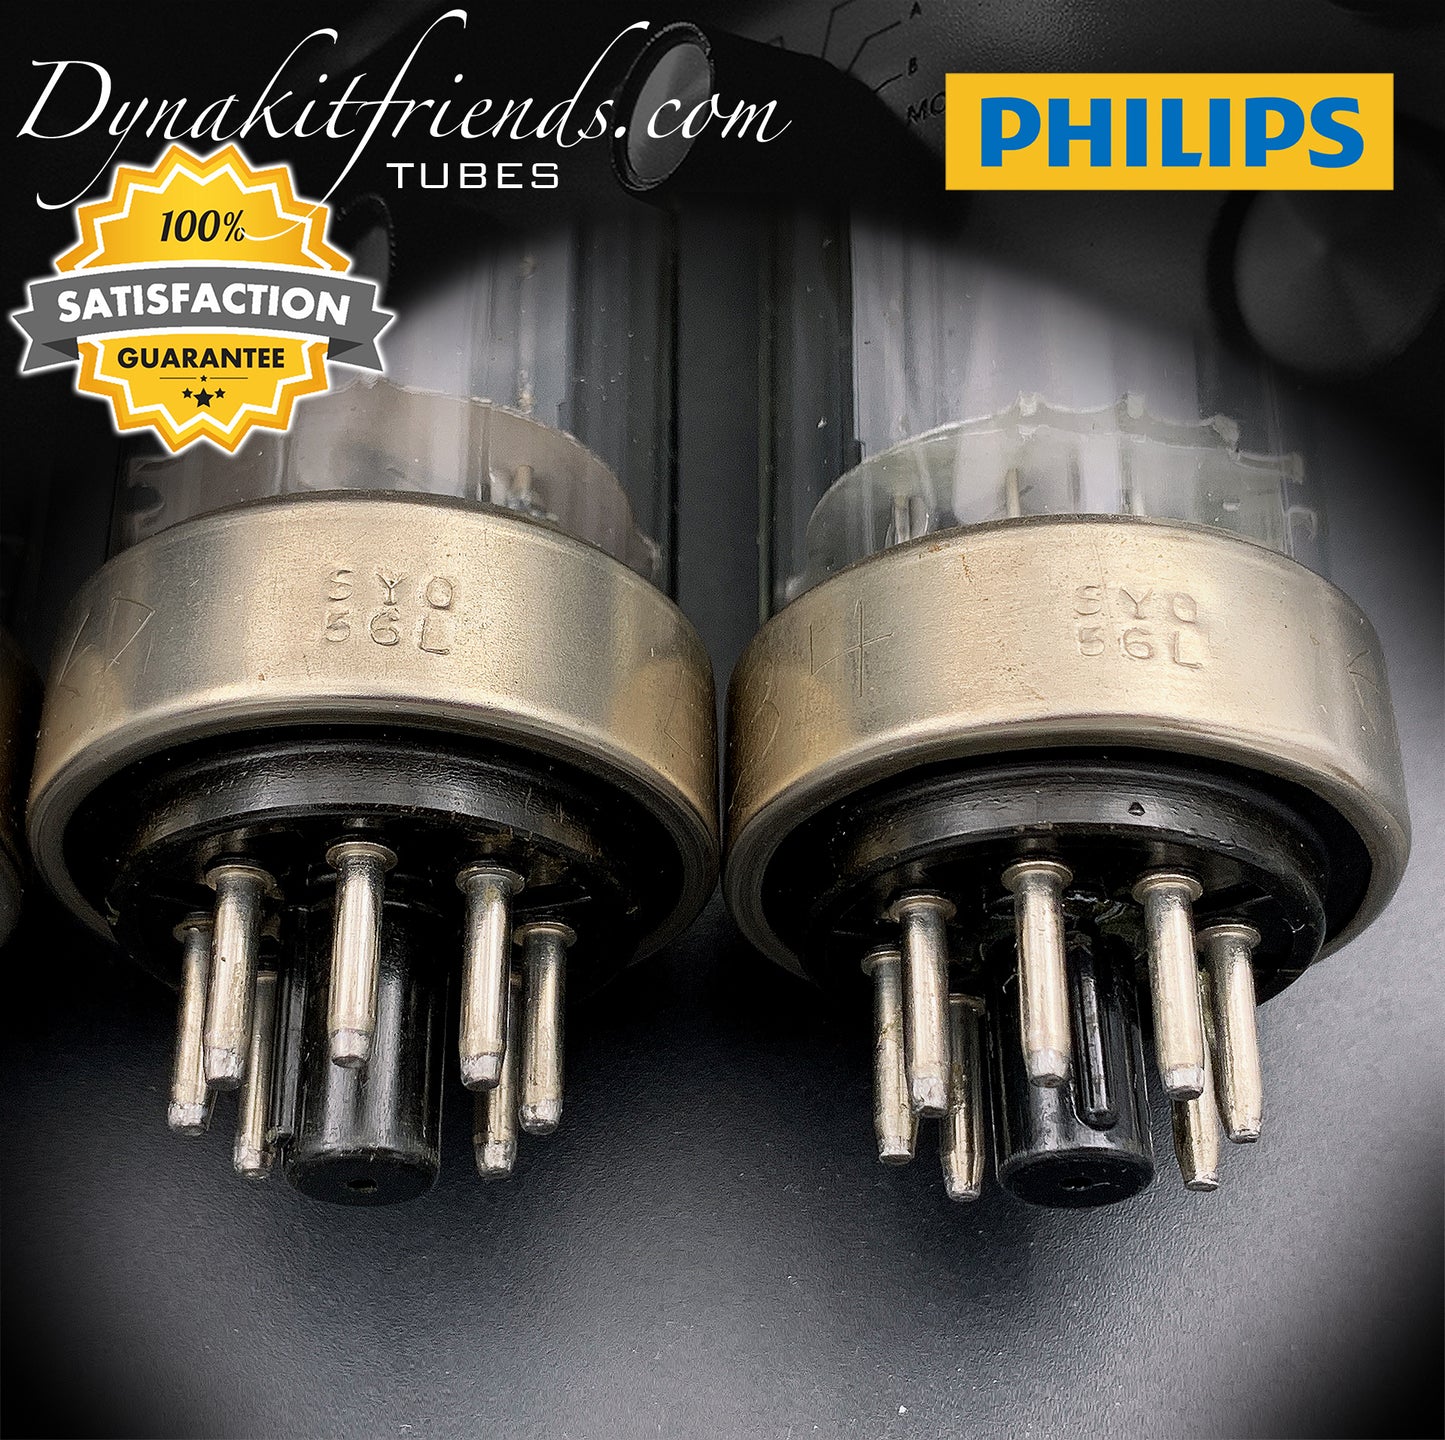 6CA7 ( EL34 ) PHILIPS Eindhoven One piece Disc Getter Matched Tubes Made in Holland